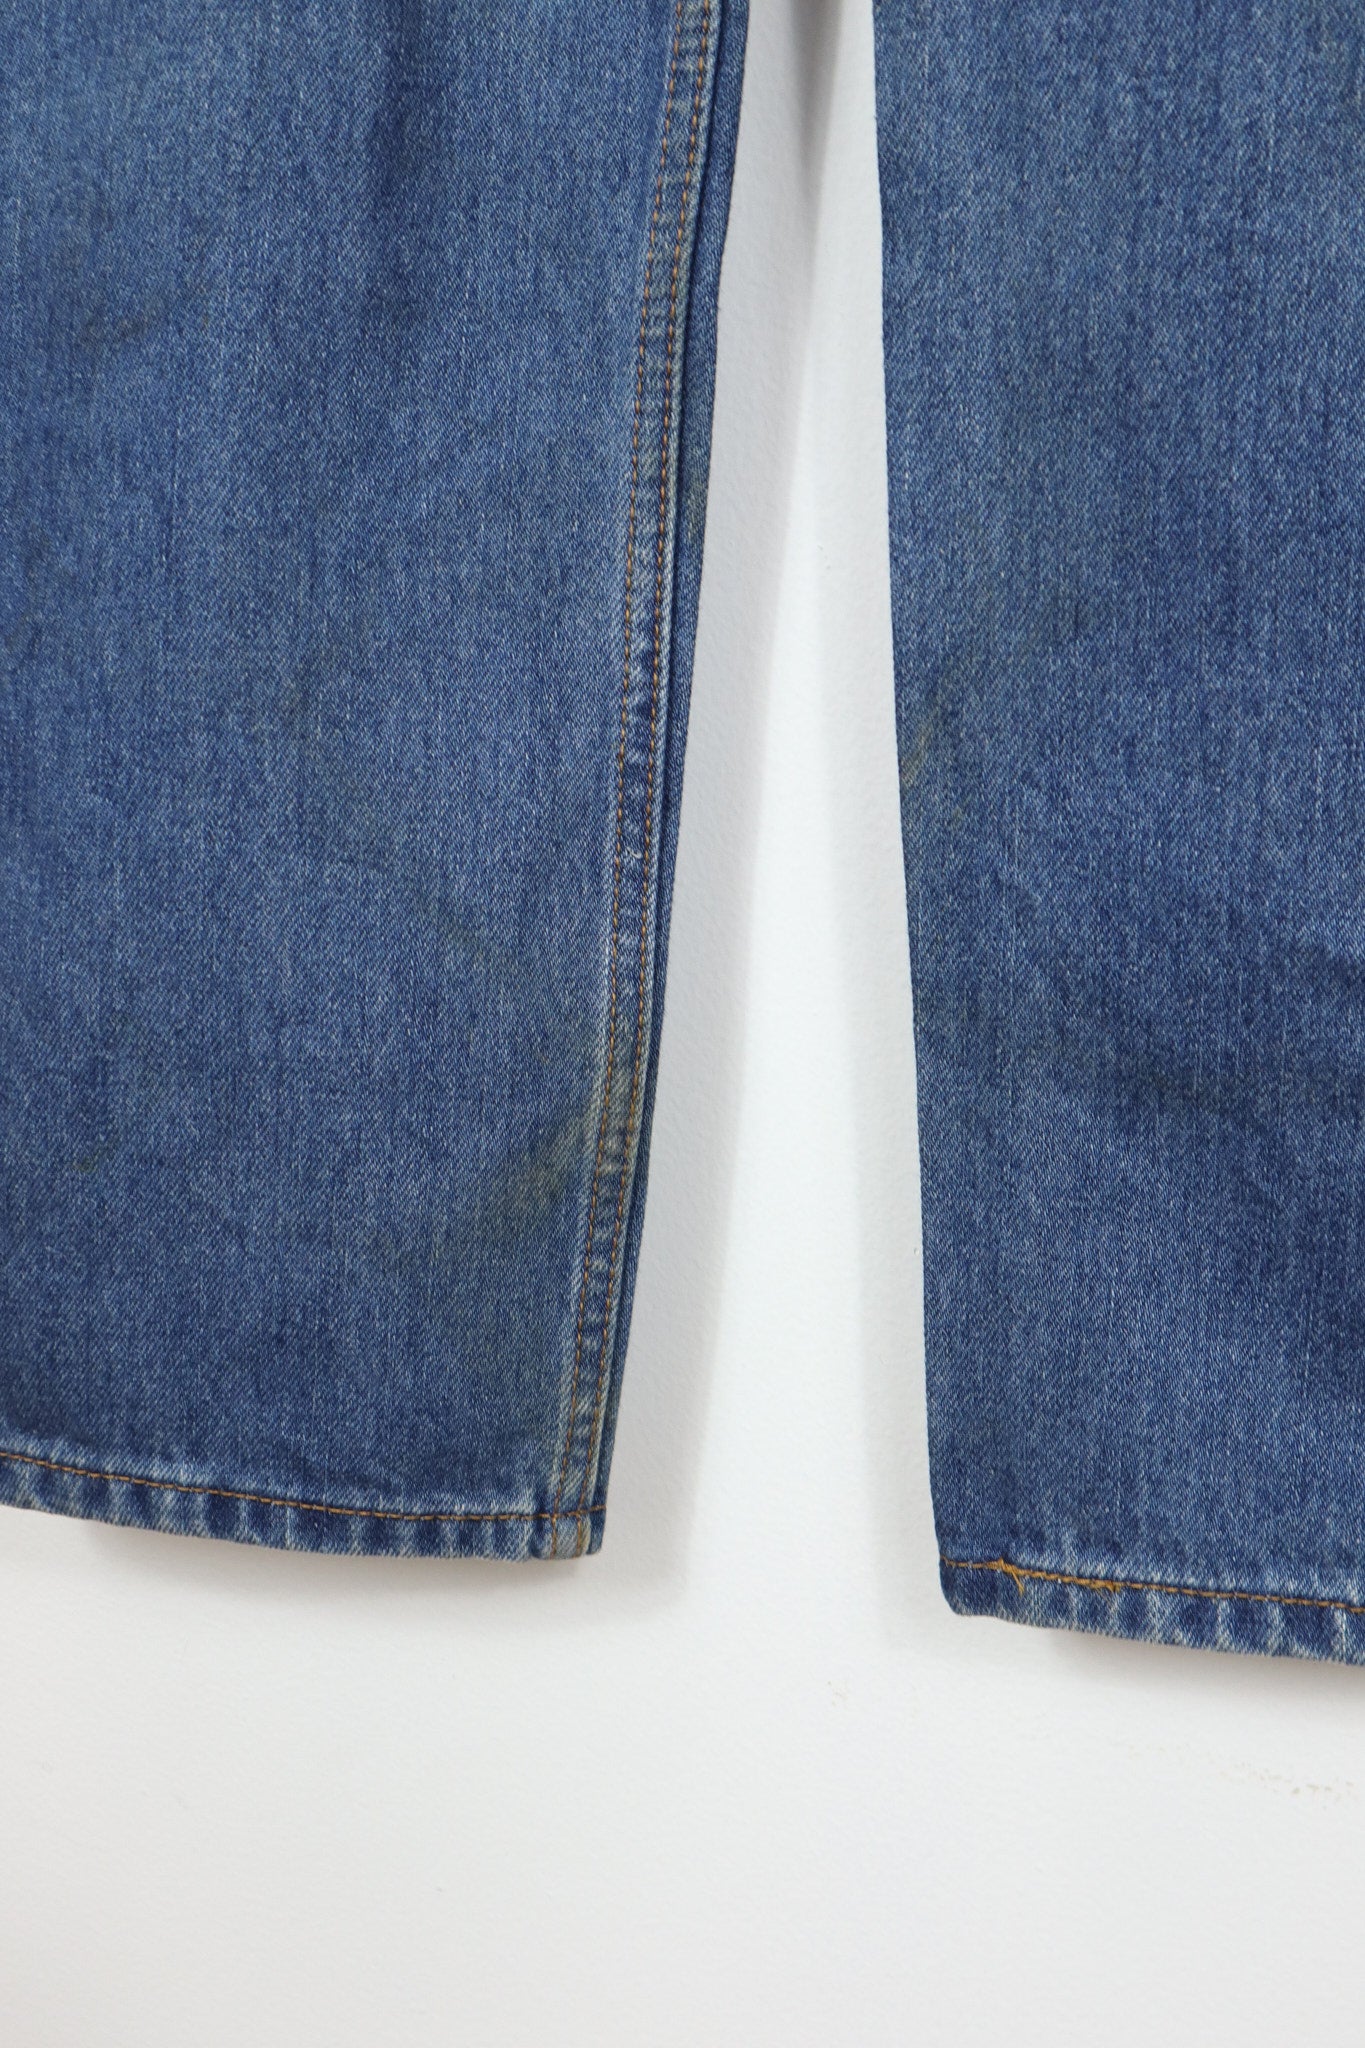 Vintage Levi's Relaxed Fit Jeans 02